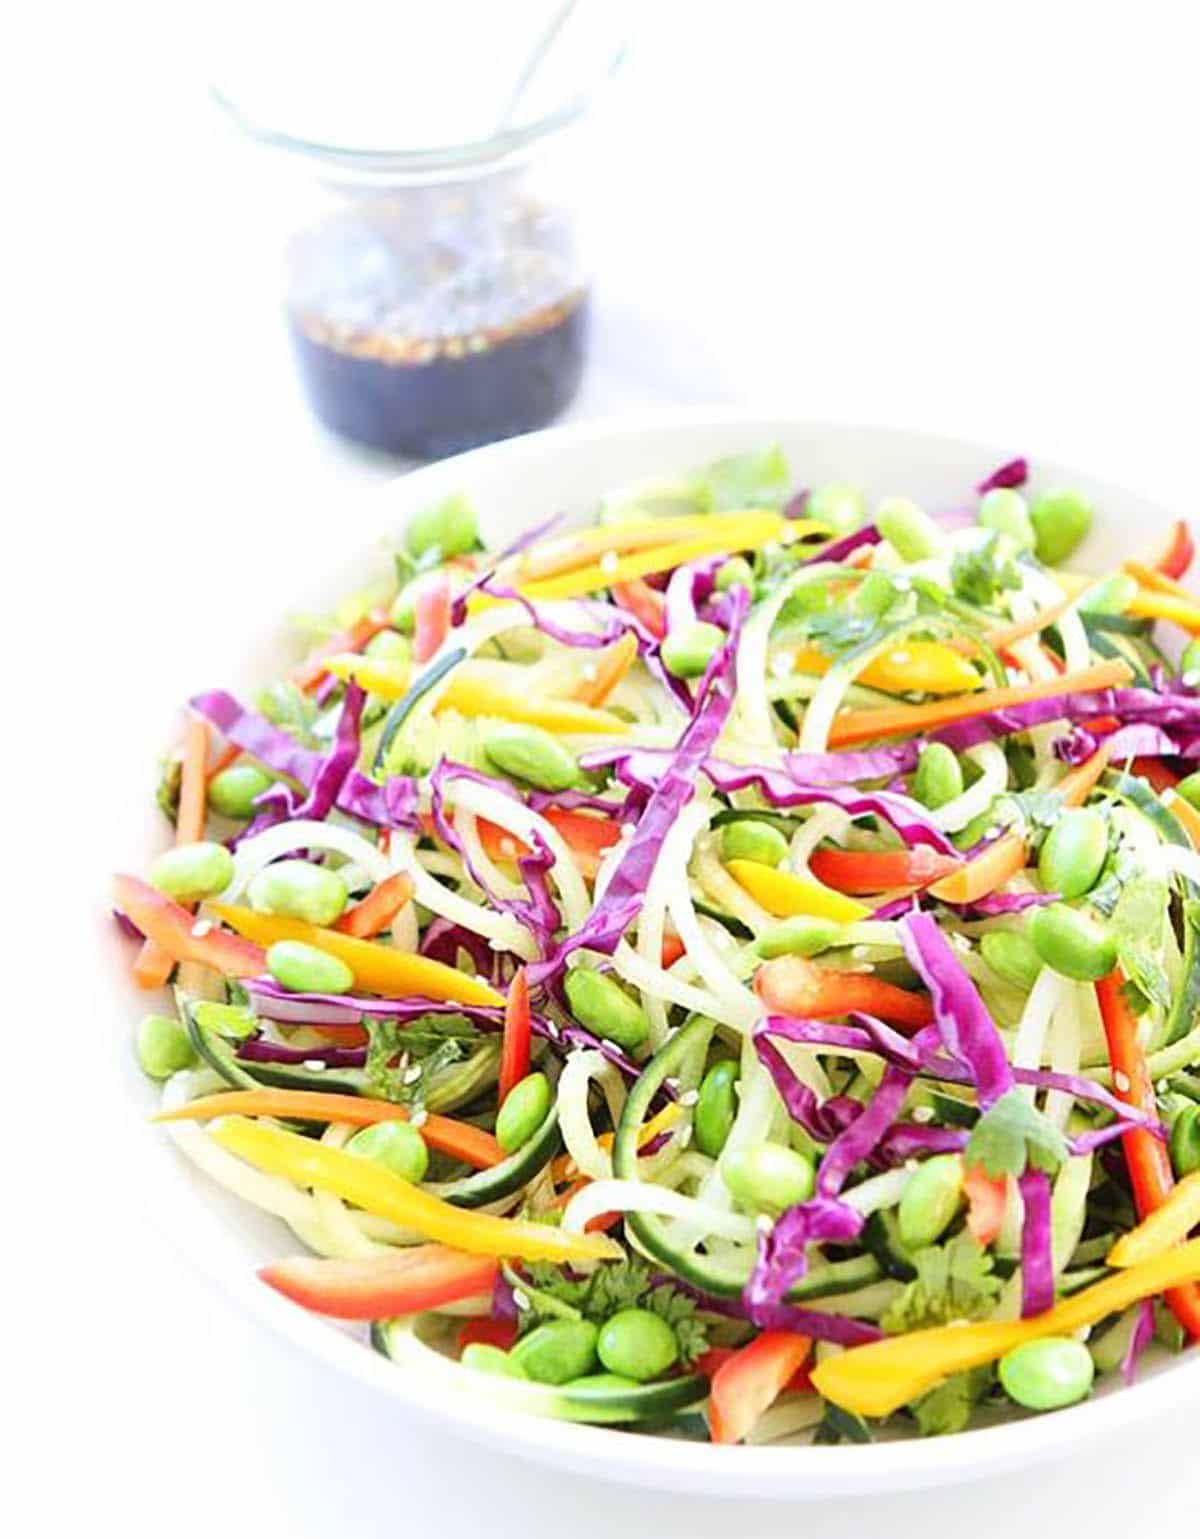 Cucumber Noodle Salad with Lite Soy or Tamari Dressing.